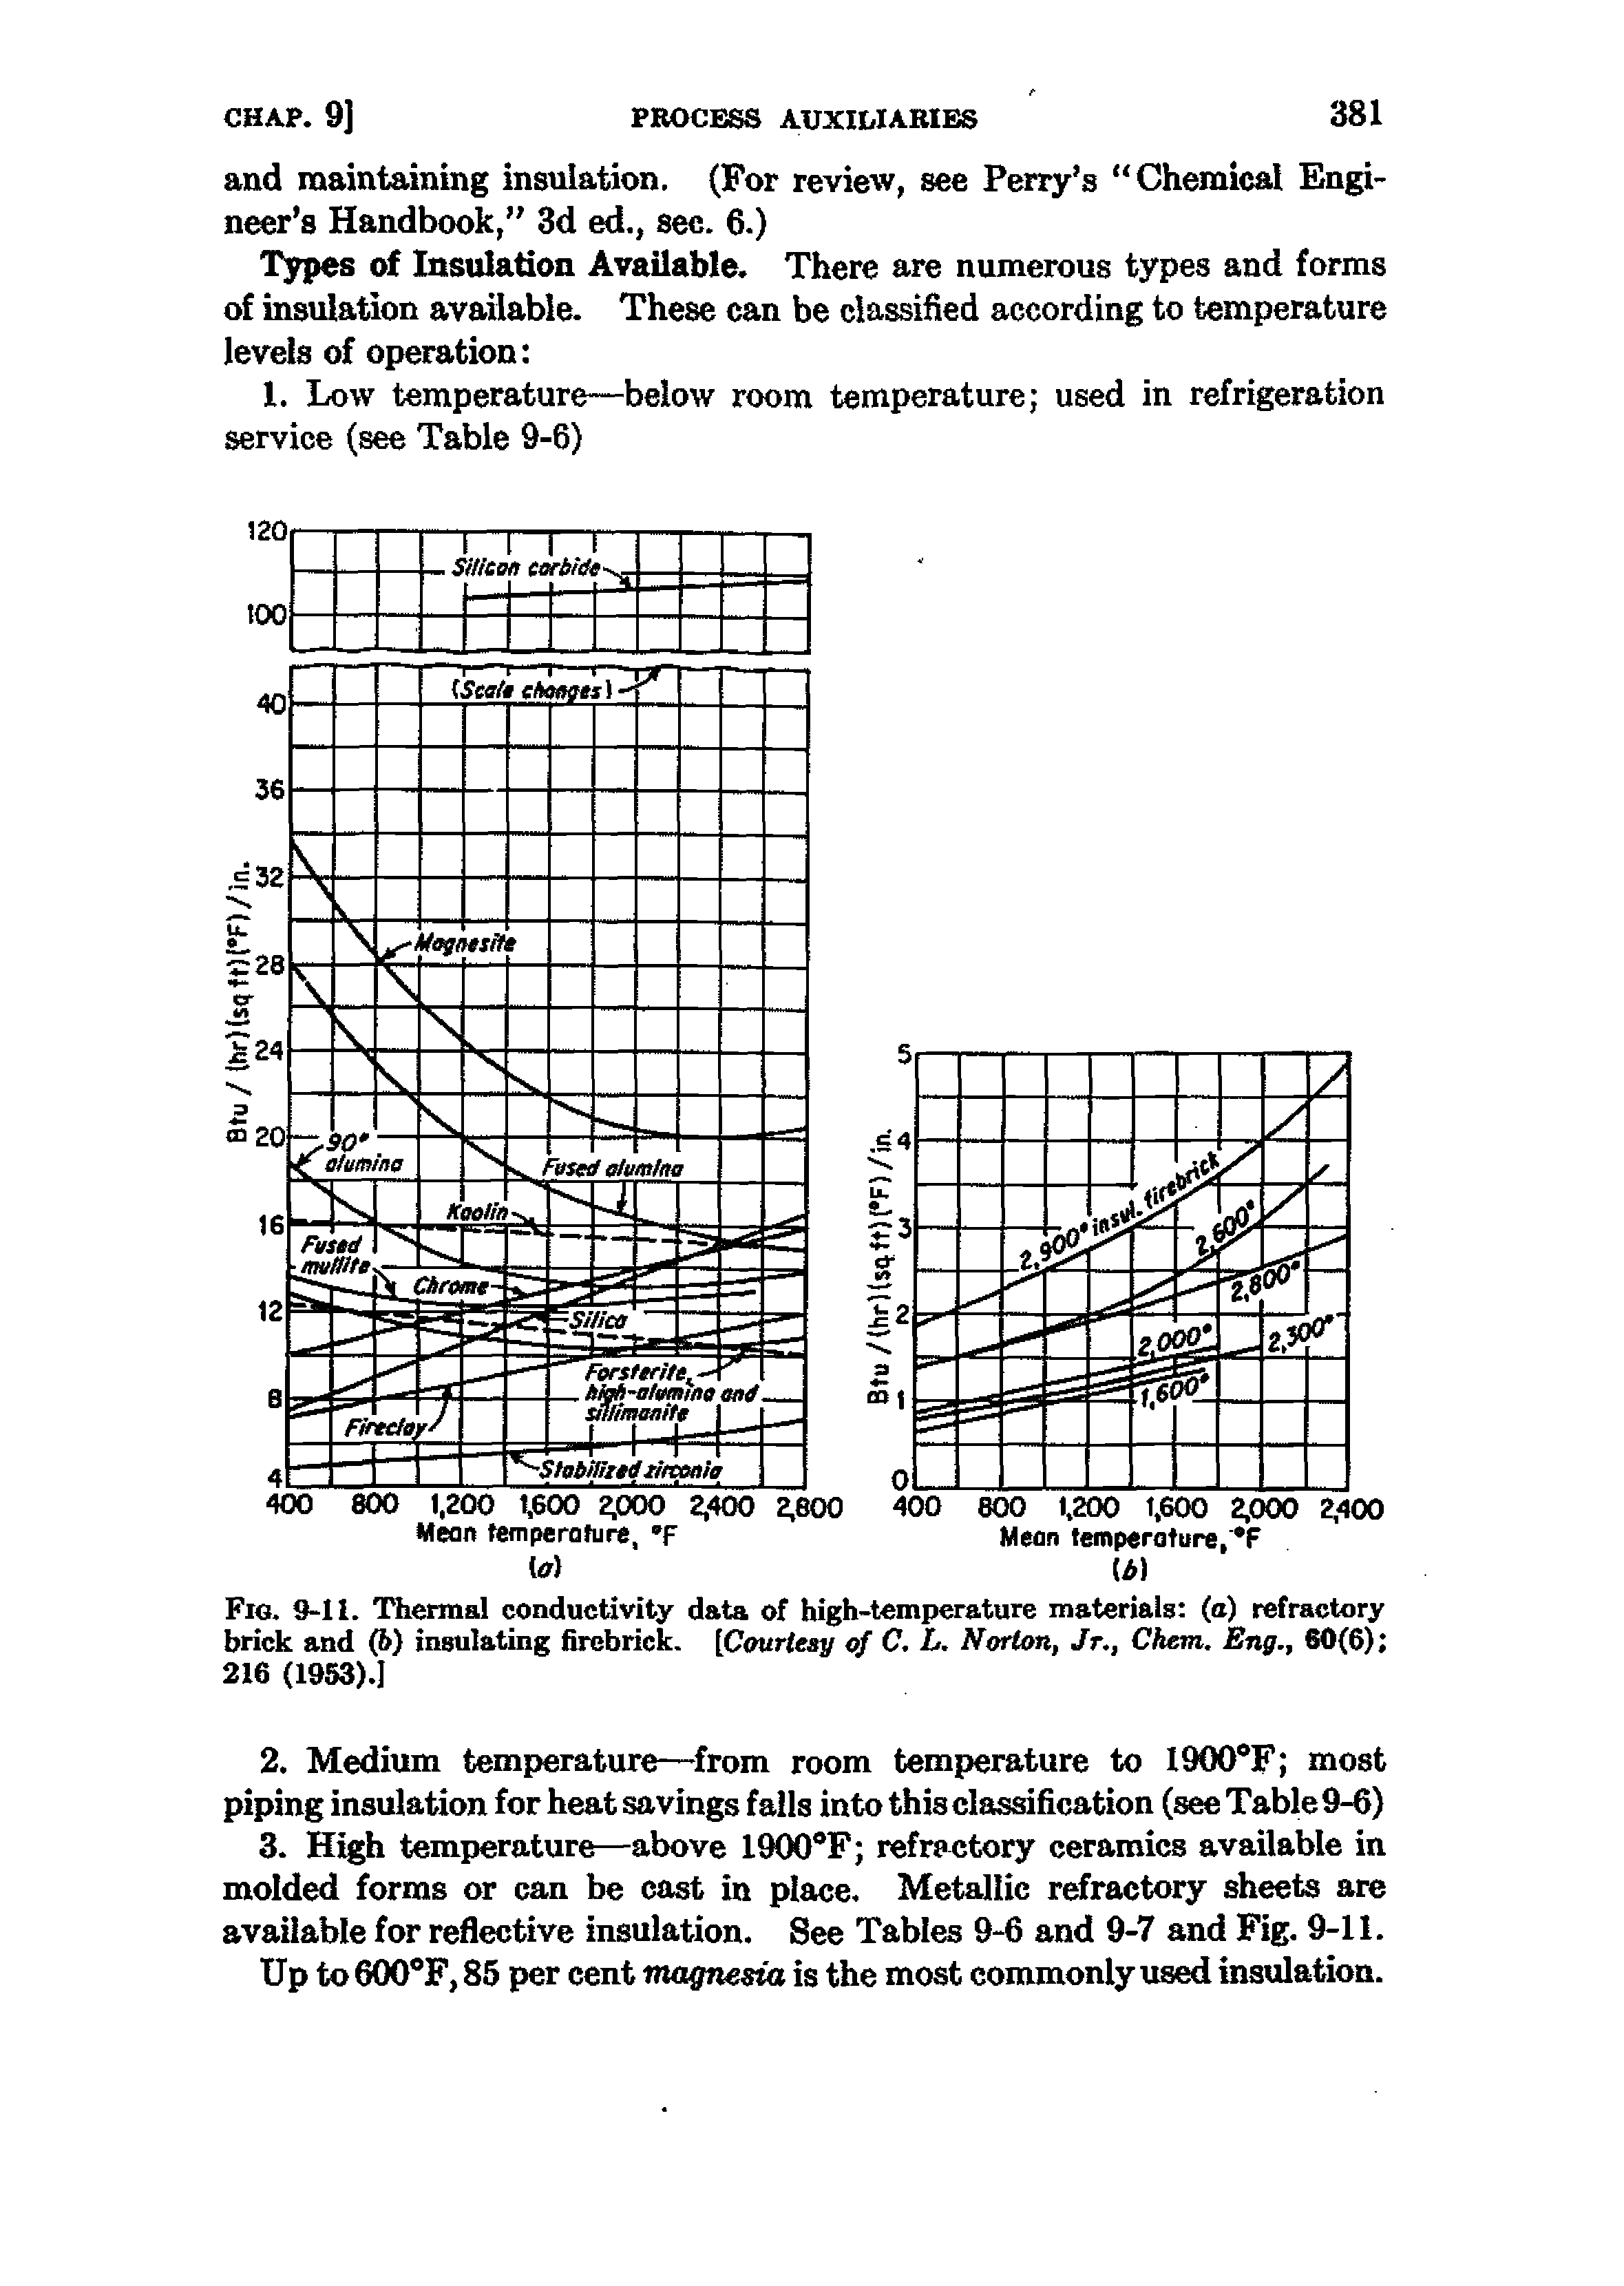 Fig. 9-11. Thermal conductivity data of high-temperature materials (o) refractory brick and (6) insulating firebrick. Courtesy of C. L, NorUm, Jr., Chem. Eng., 60(6) 216 (1953).]...